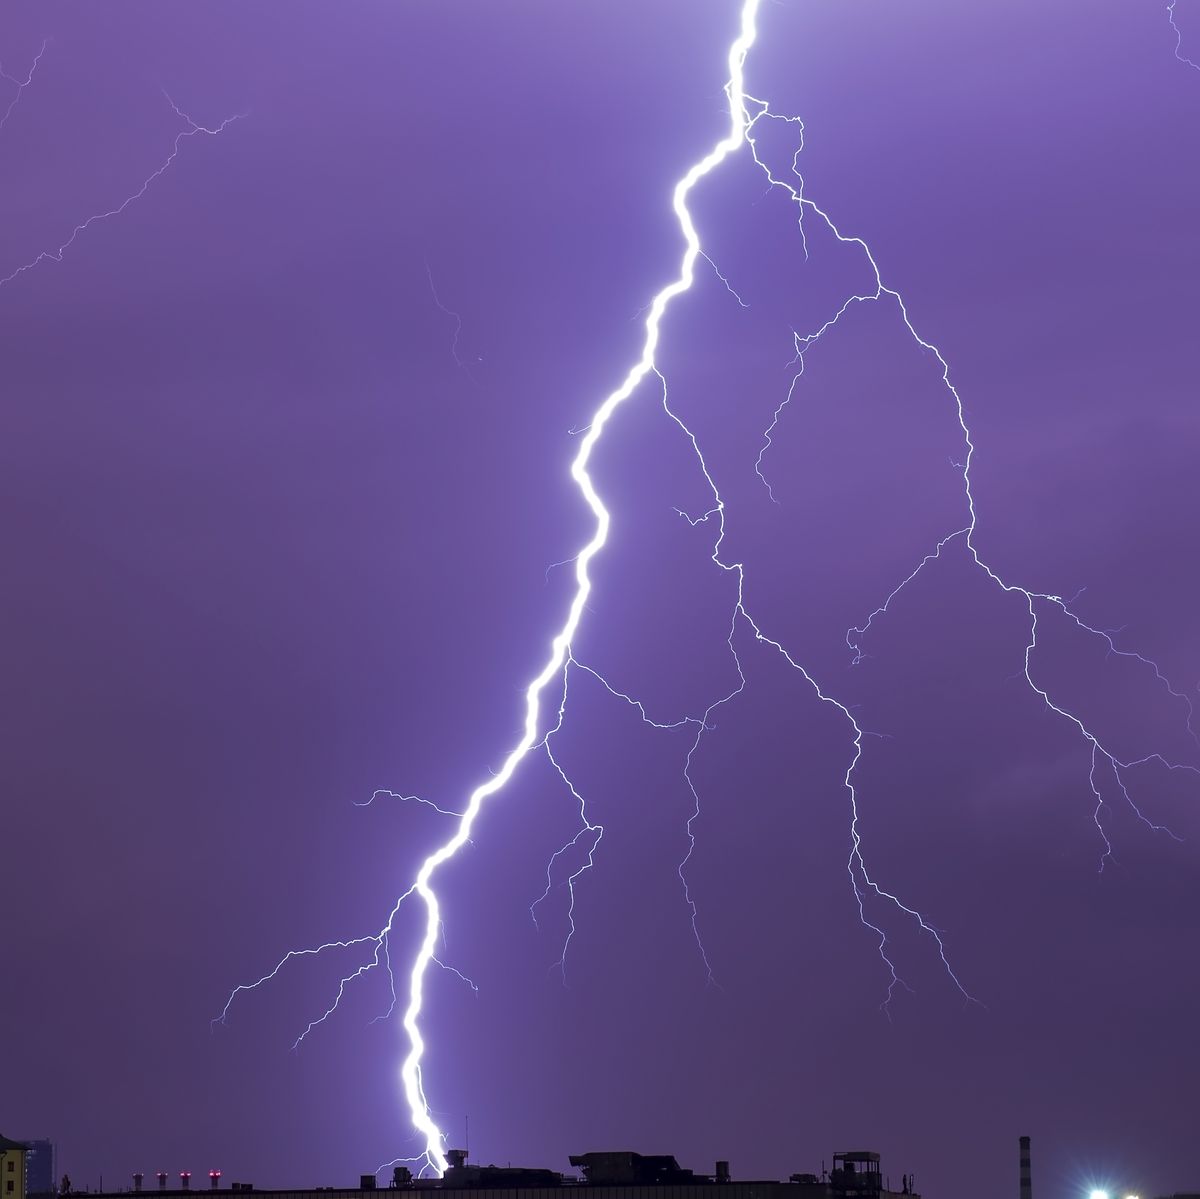 Struck By Lightning: Health Effects and What It Does to the Body